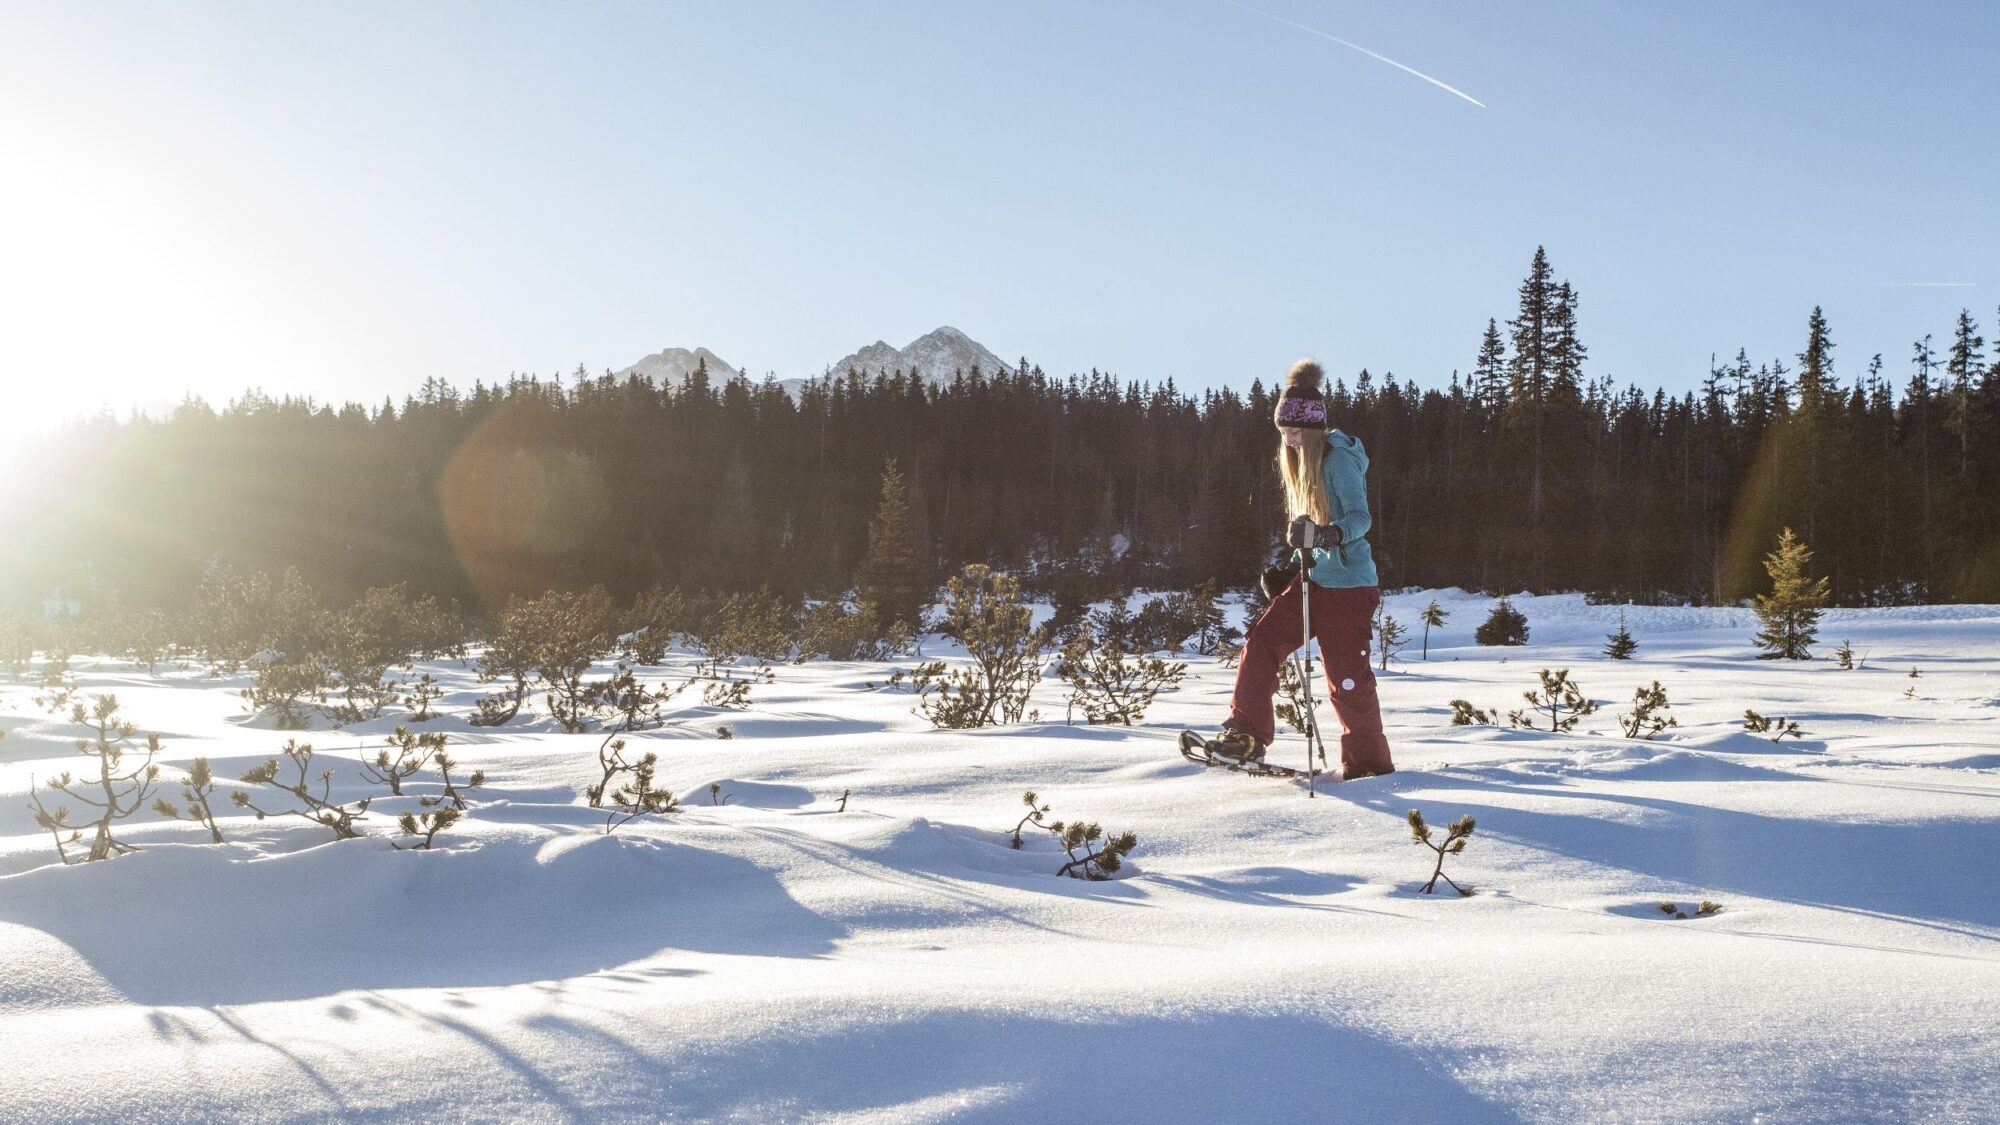 Great snowshoe hikes in a snow-covered landscape are possible at the hiking and wellness hotel Gassner.